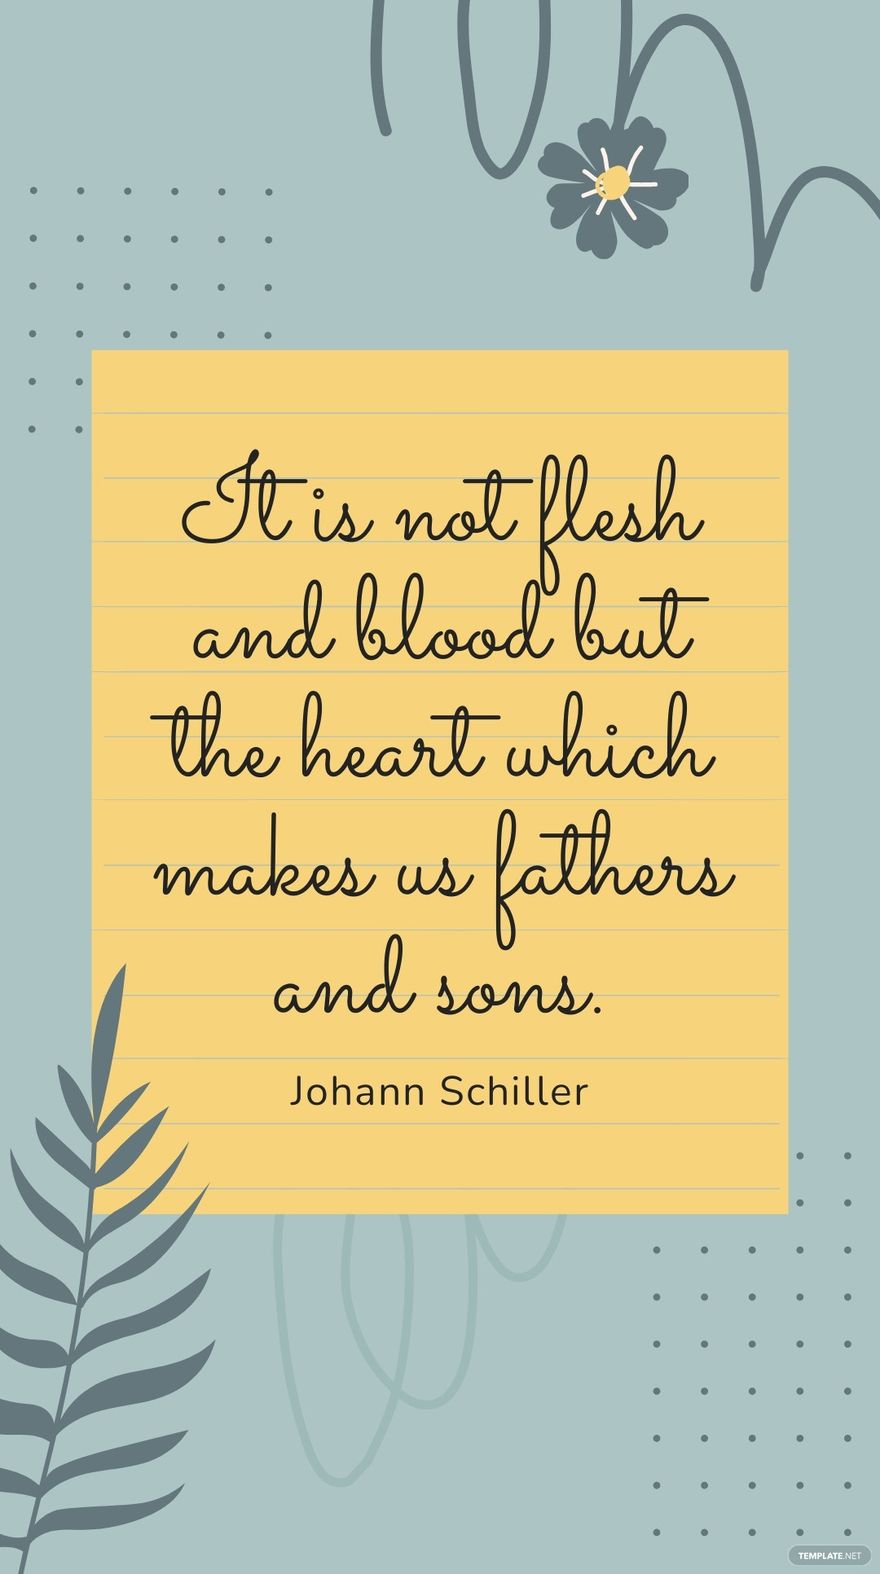 Johann Schiller - It is not flesh and blood but the heart which makes us fathers and sons.